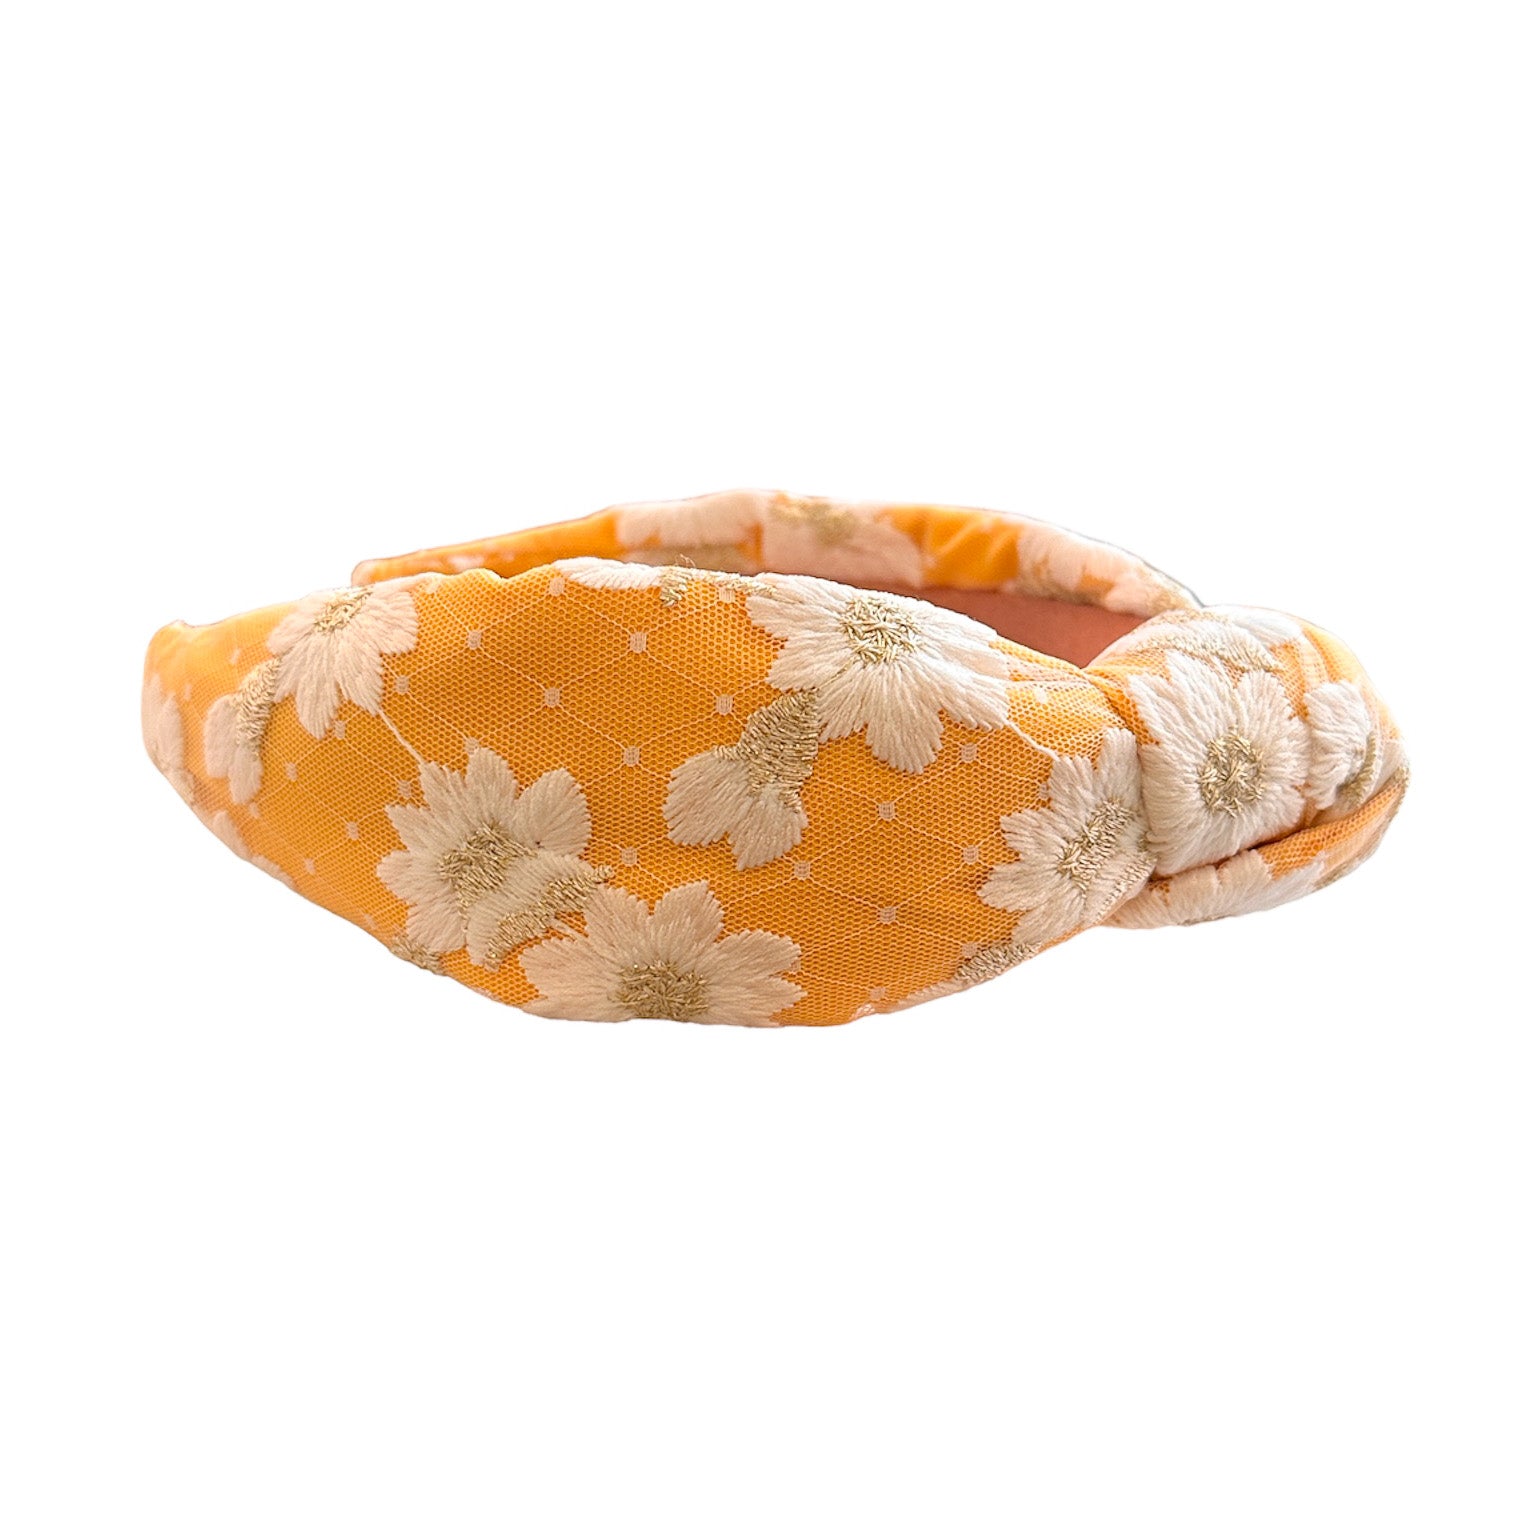 Marigold Floral Embroidered Knotted Headband